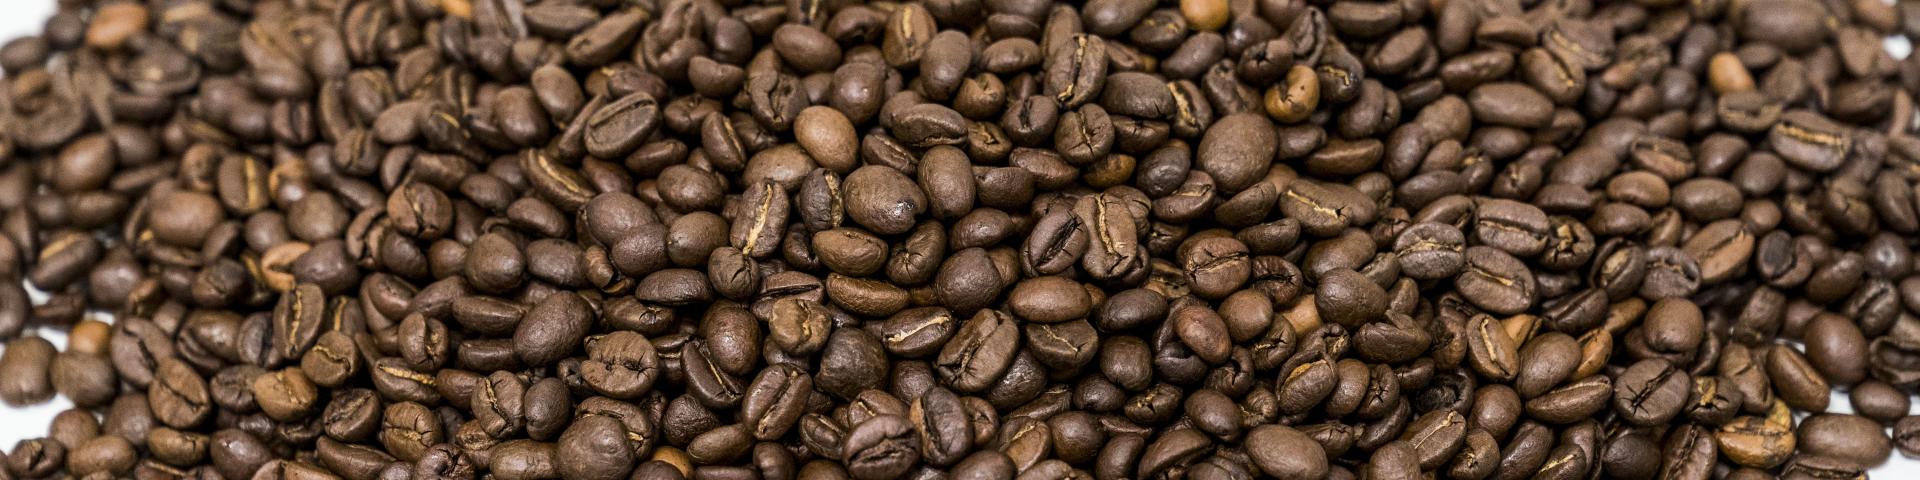 Useful Wholesale Arabica coffee Beans Business Tips